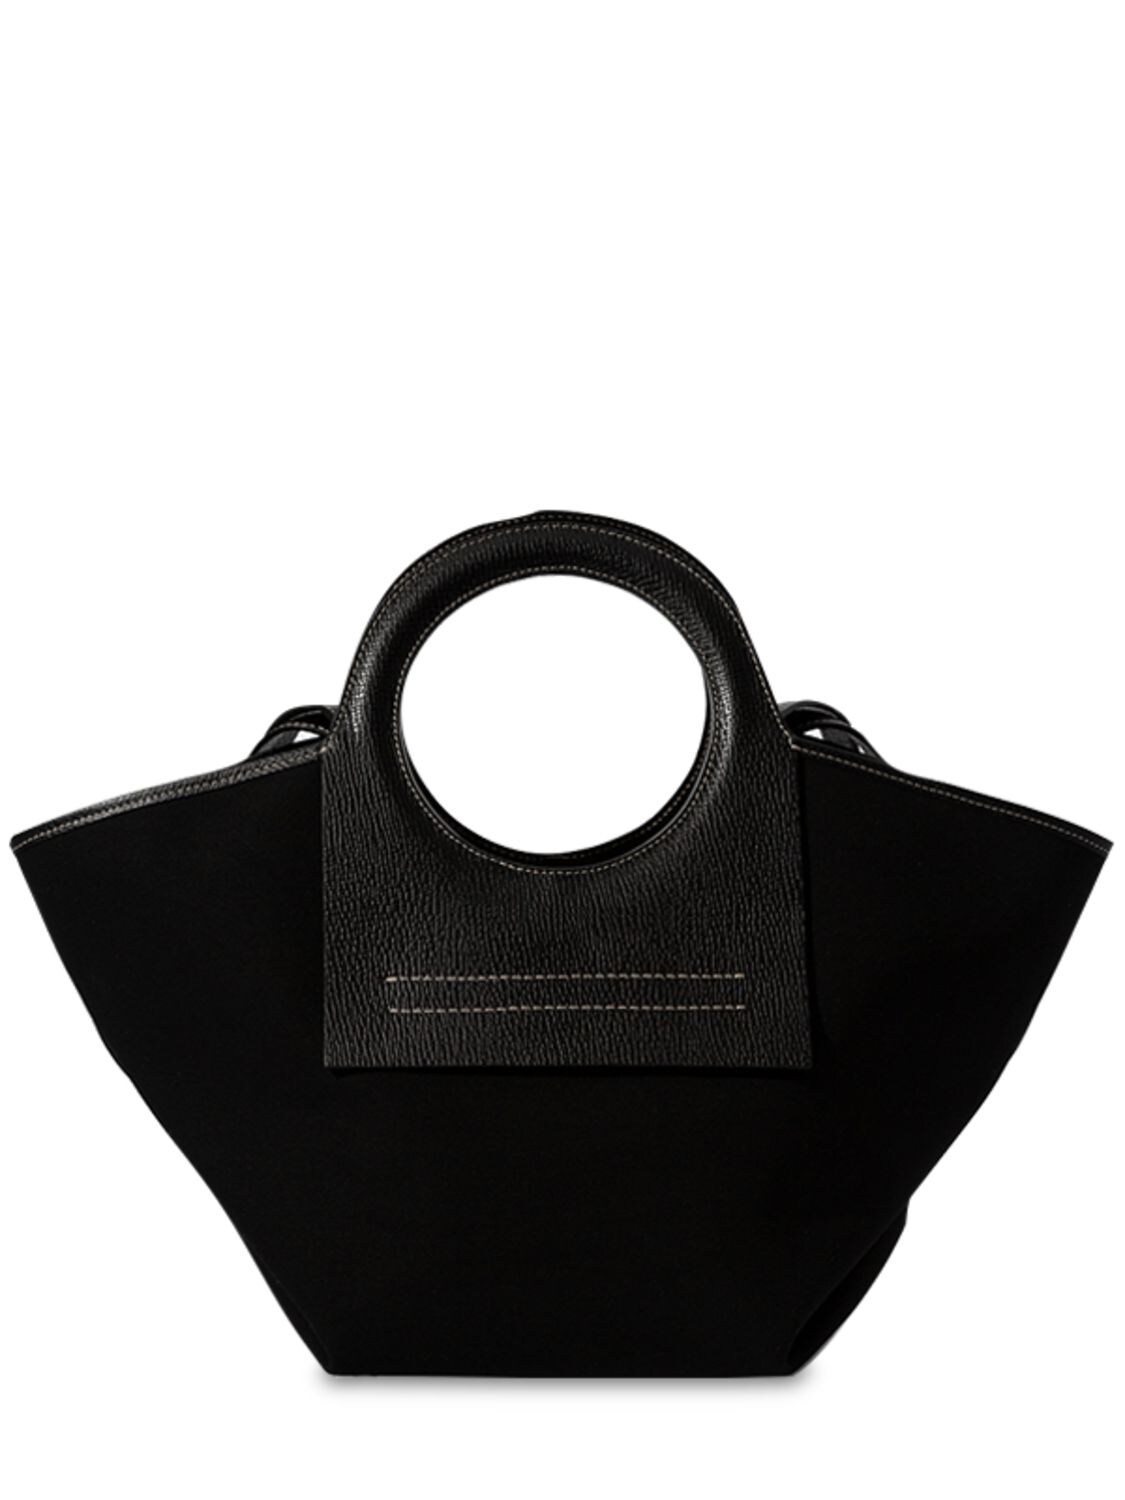 Image of Cala S Canvas & Grain Leather Tote Bag